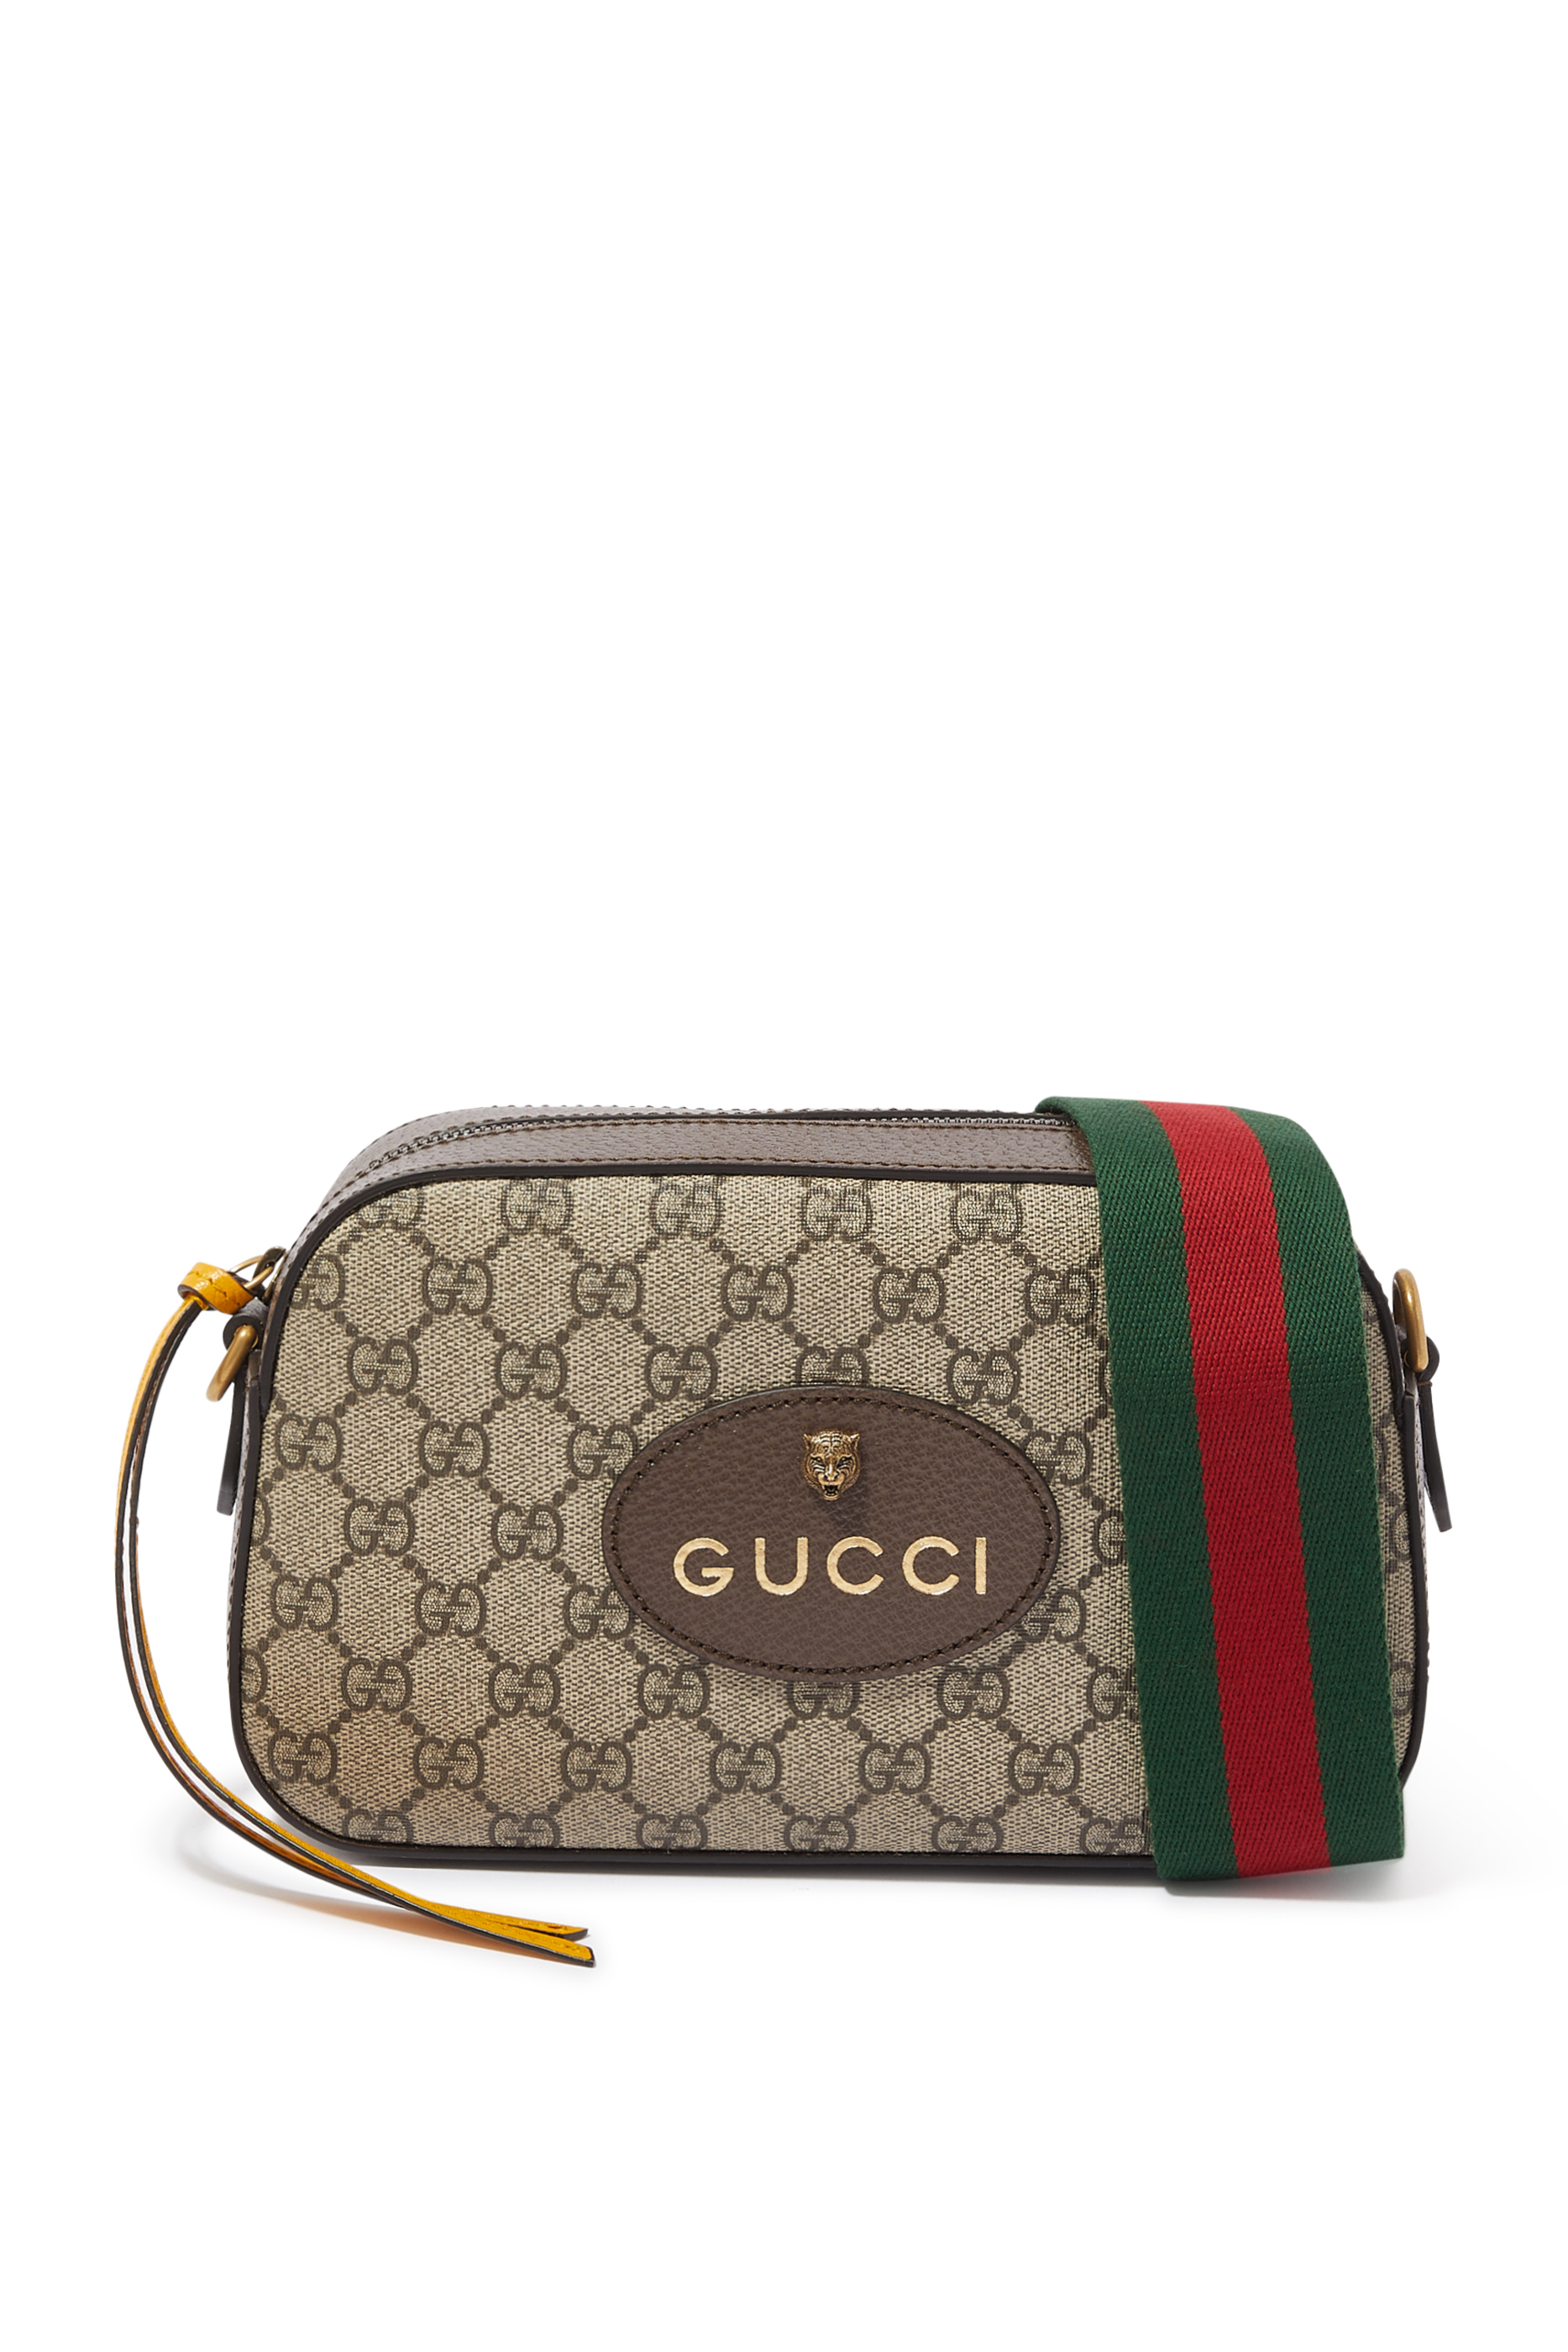 Shop Gucci Cross Body Bags for Men Collection Online in the Kuwait